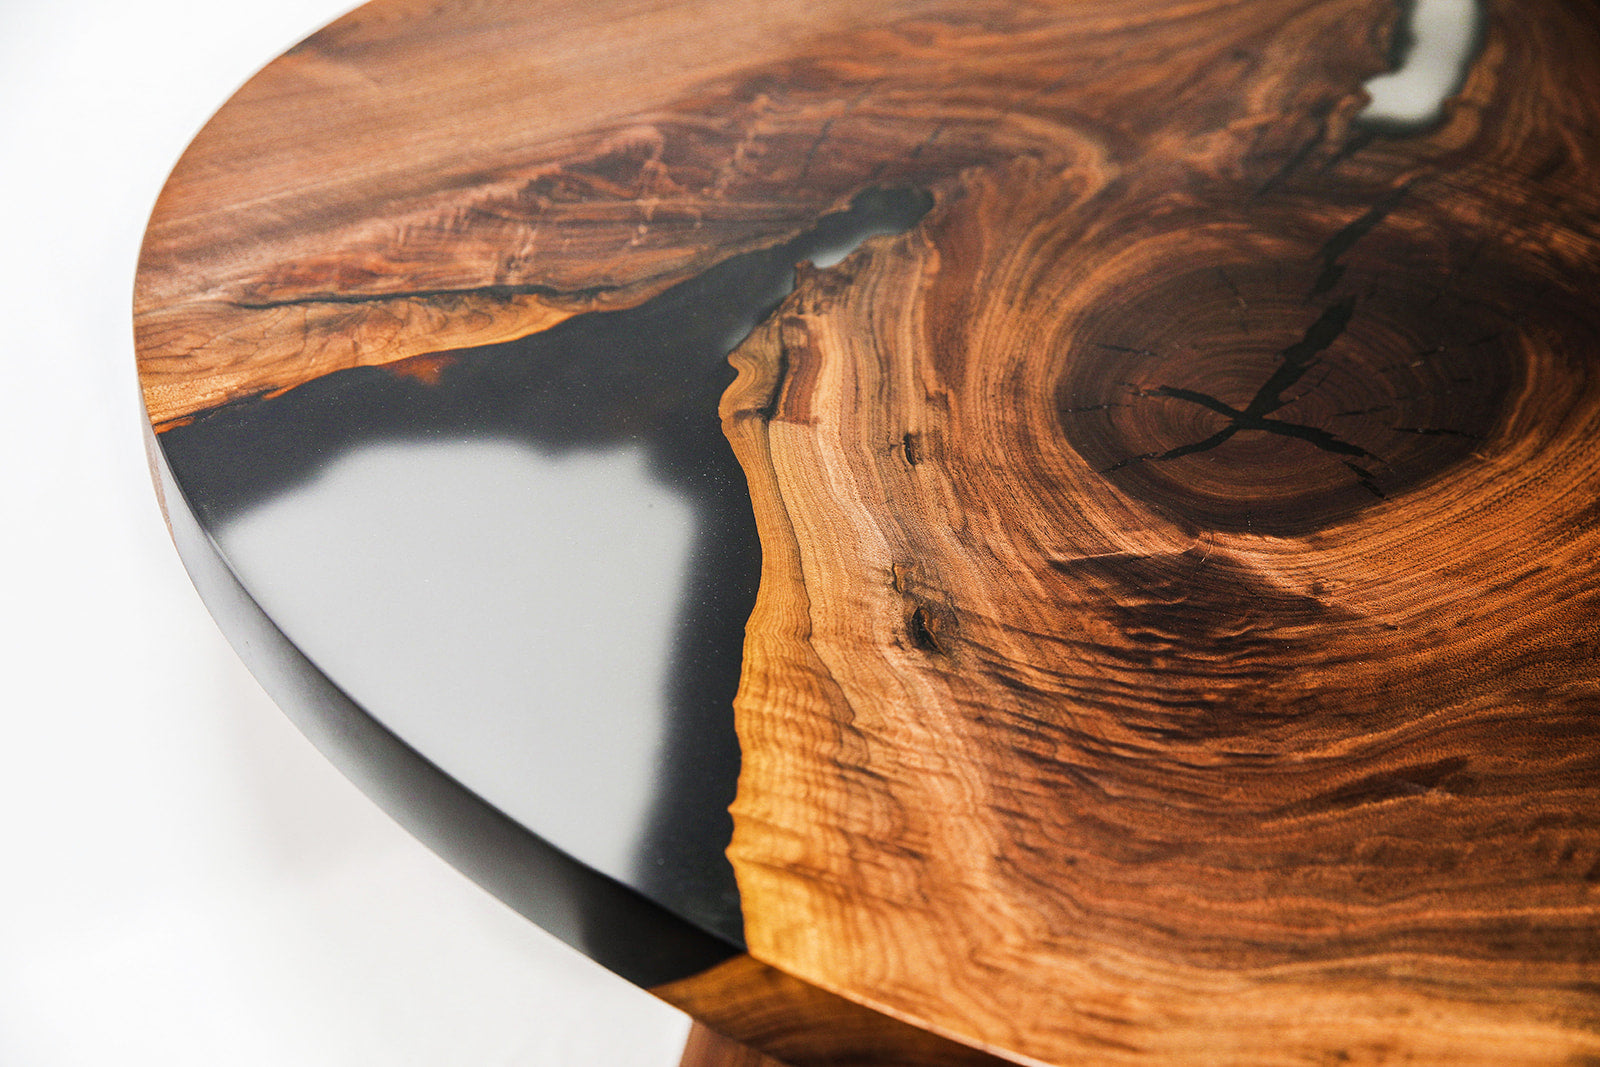 Black Walnut And Resin Bistro Table